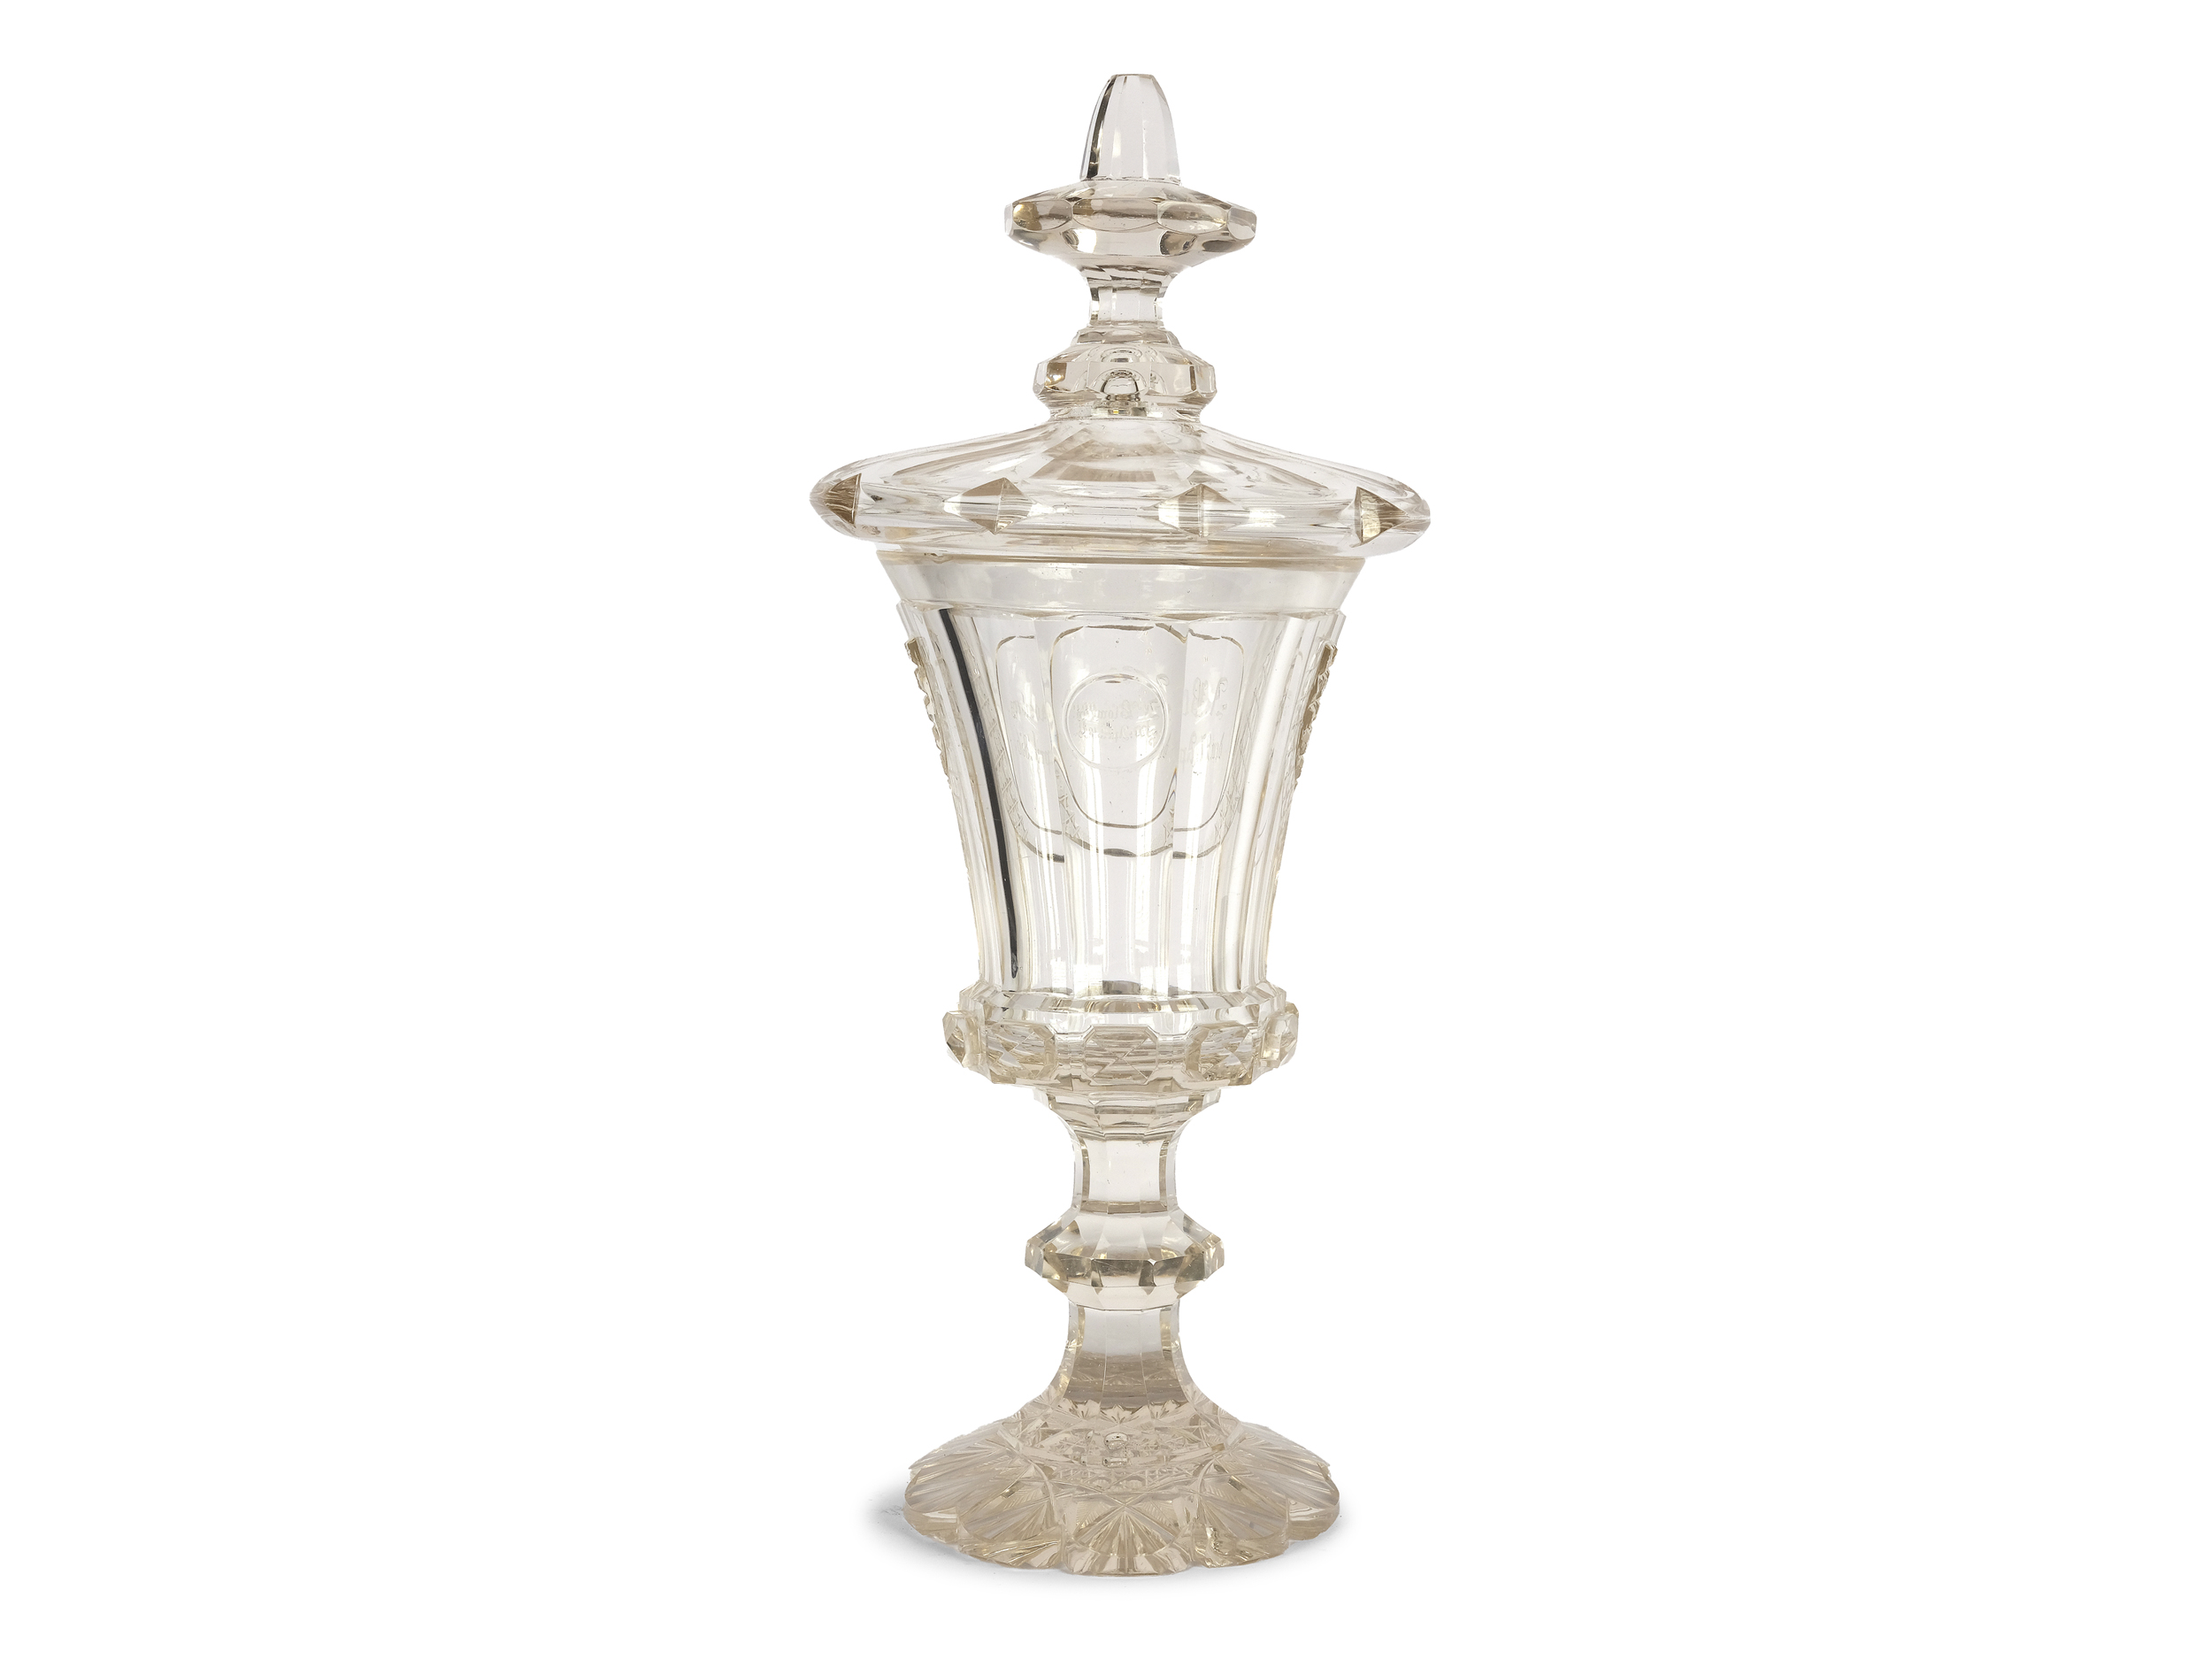 Lidded goblet, mid 19th century - Image 4 of 8